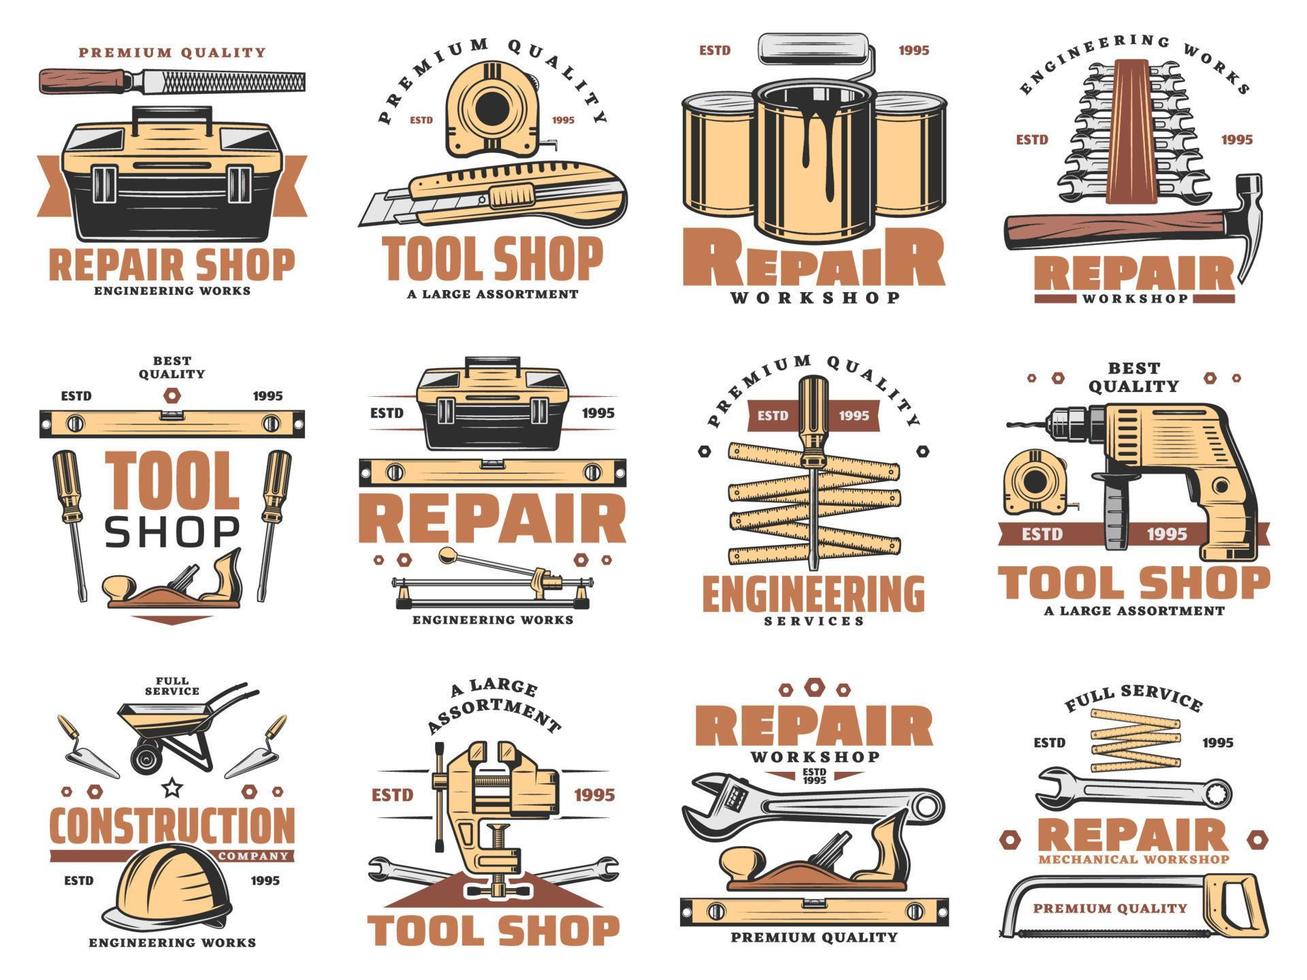 Repair and service work tools workshop icons vector